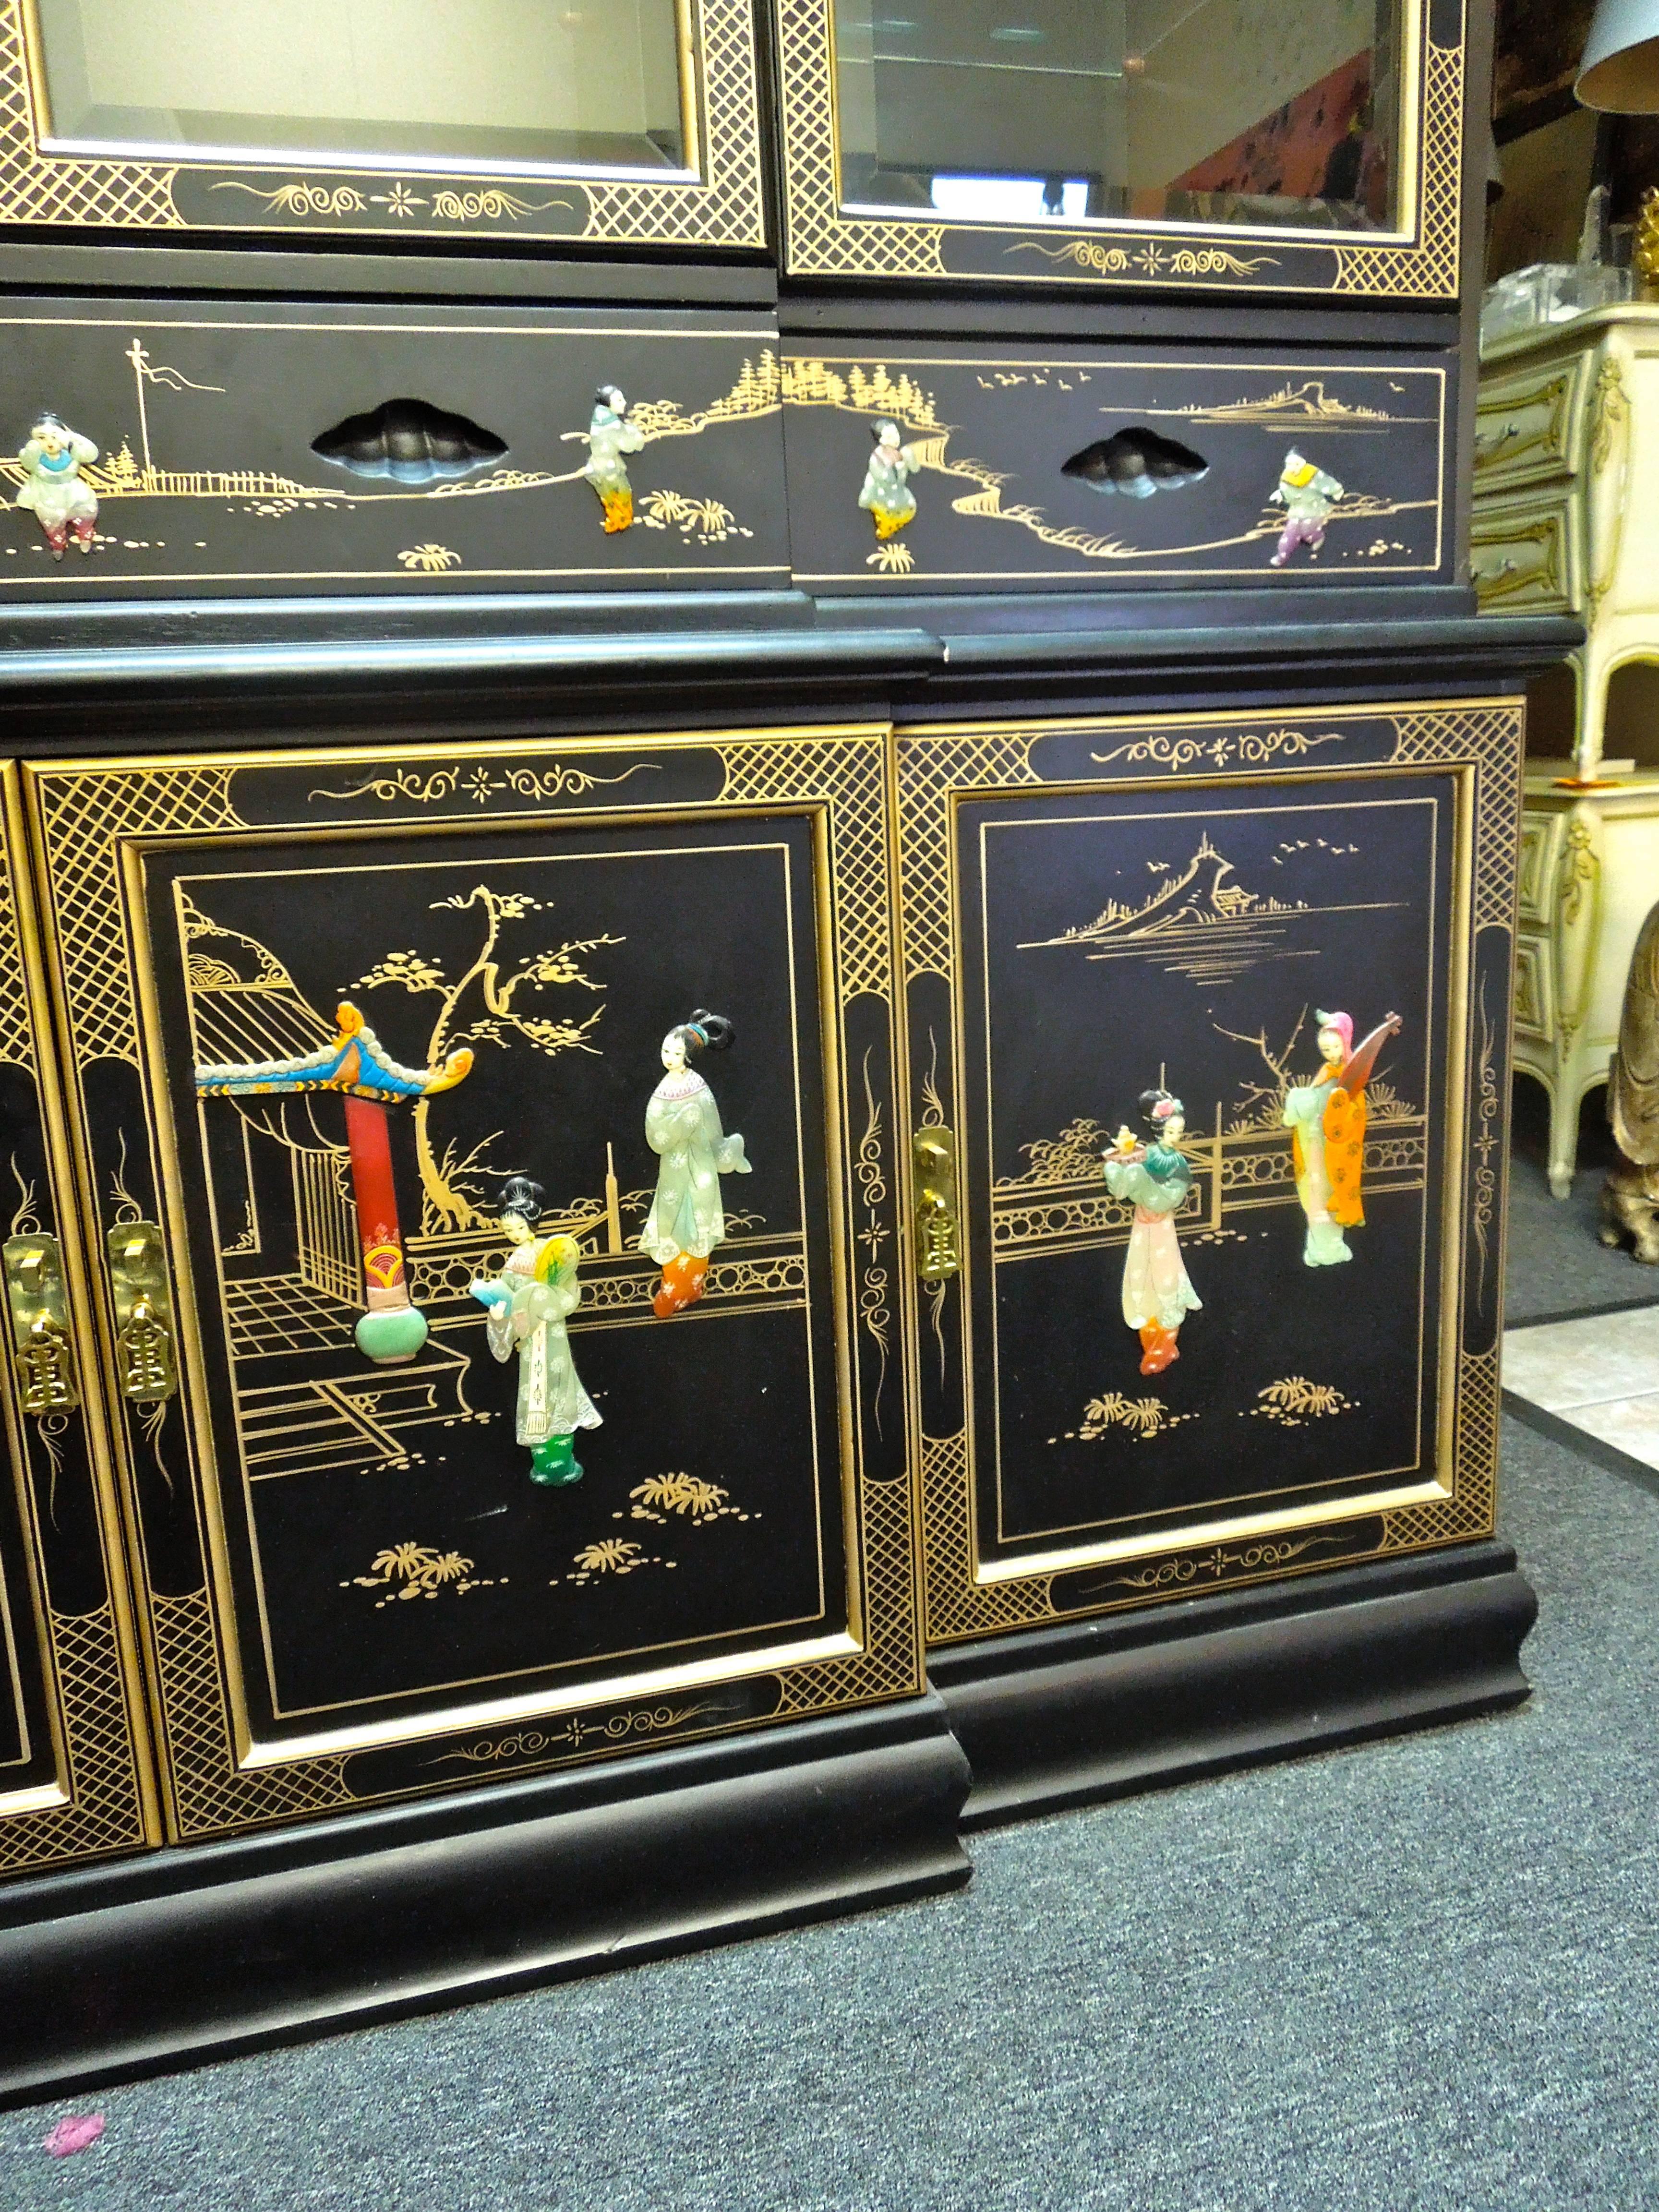 A very rare and beautiful buffet cabinet in the pagoda top chinoiserie design. The piece comes apart in three pieces. Pagoda can house lights inside as it is already wired, but no lights. From a very upscale Palm Springs Estate done with chinoiserie